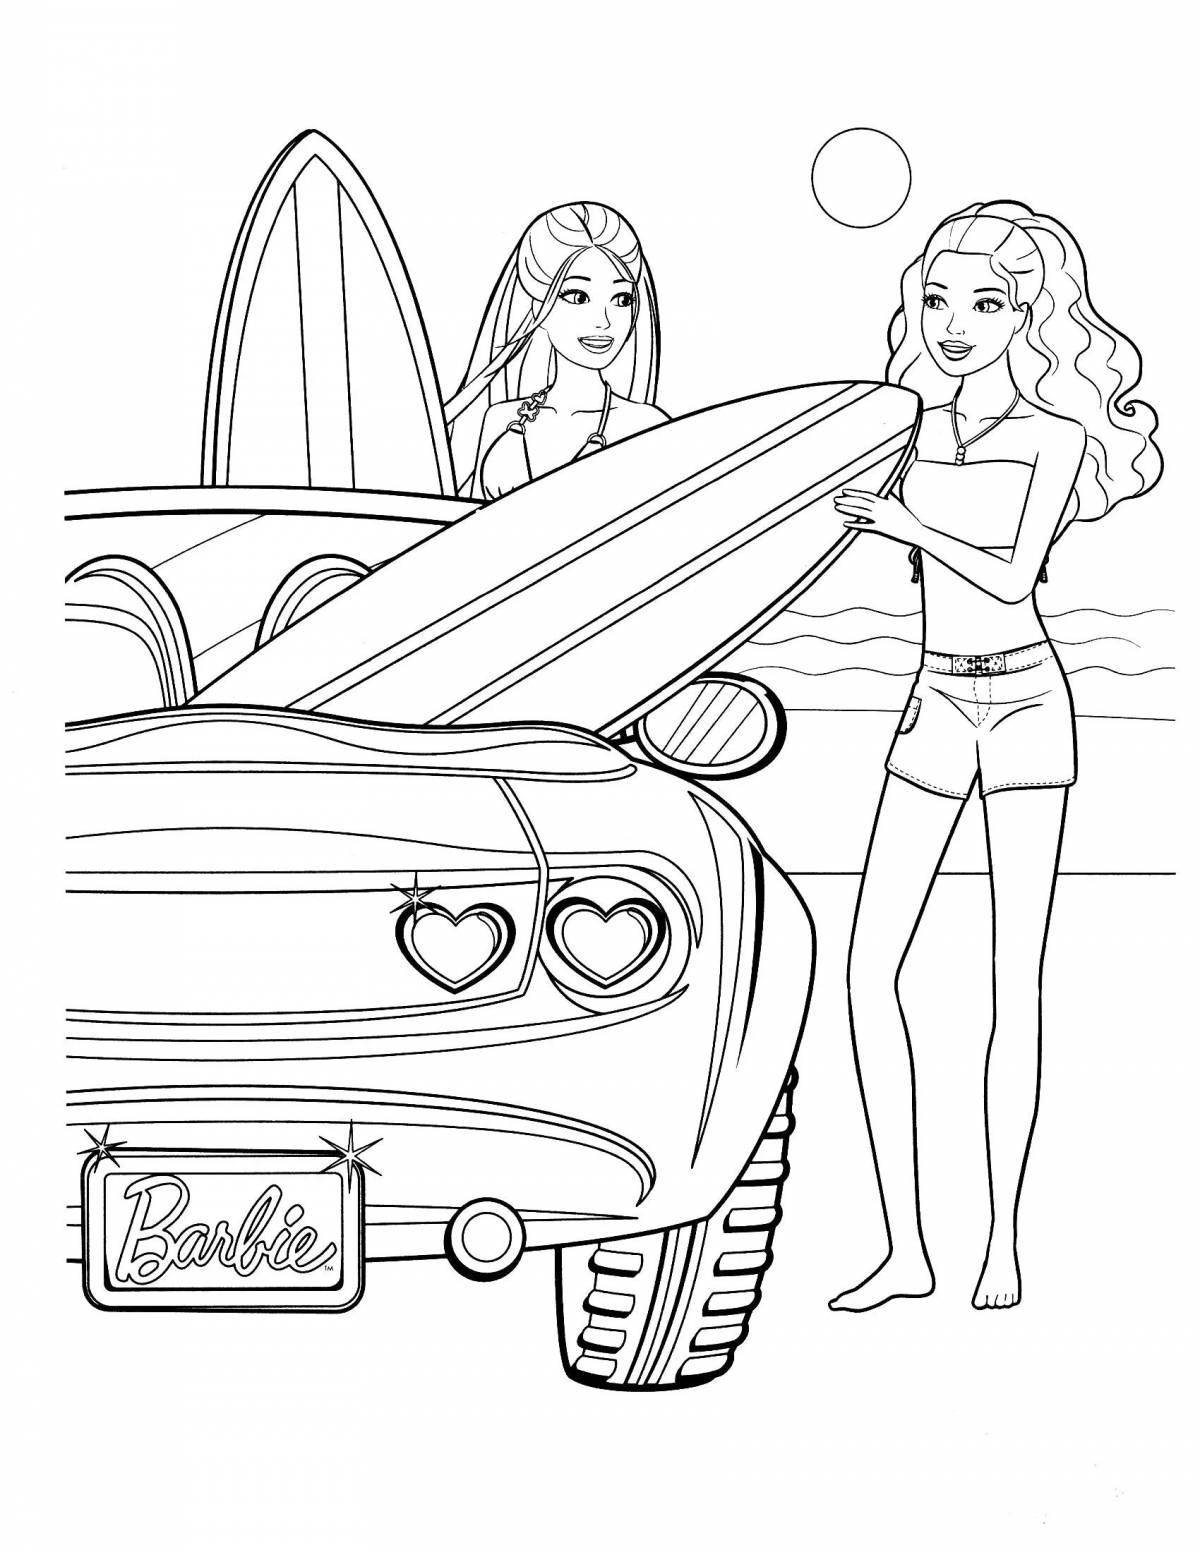 Animated barbie coloring page